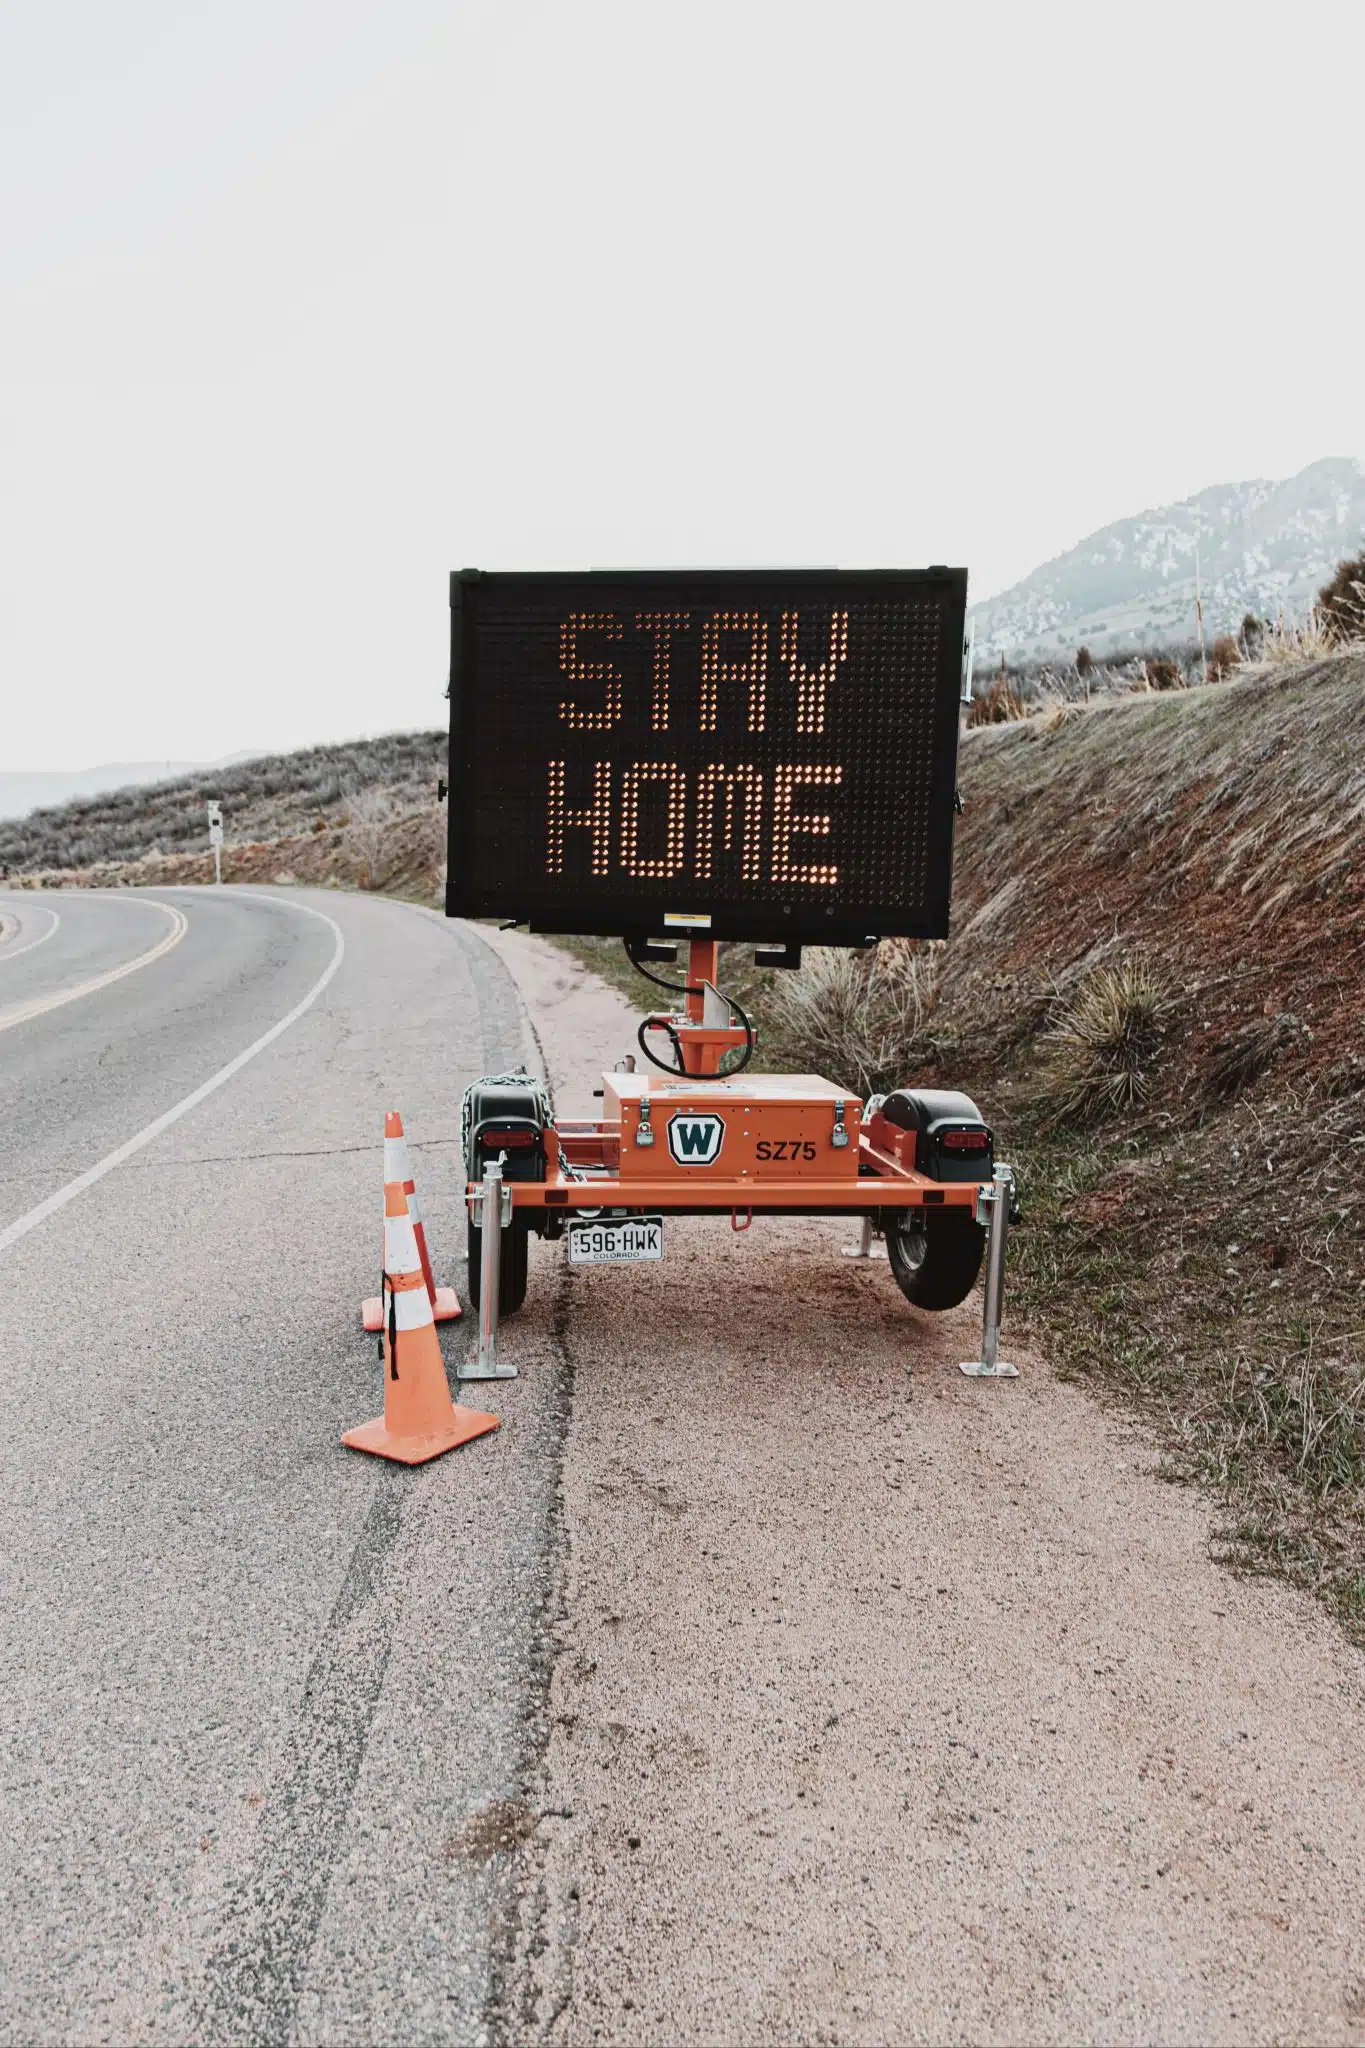 Stay home road sign 